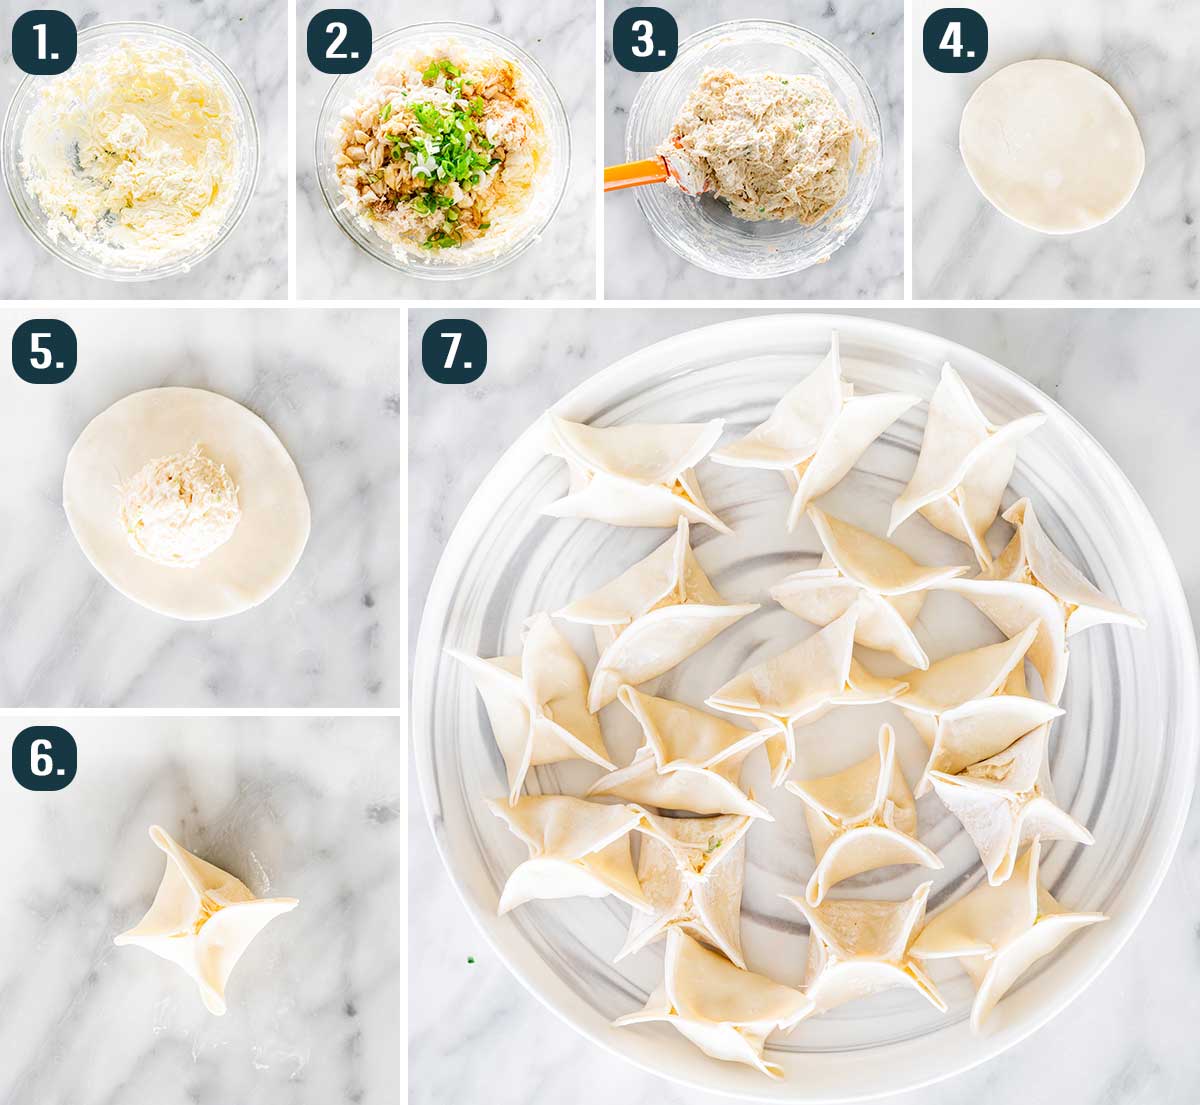 detailed process shots showing how to make crab rangoon filling and how to assemble them